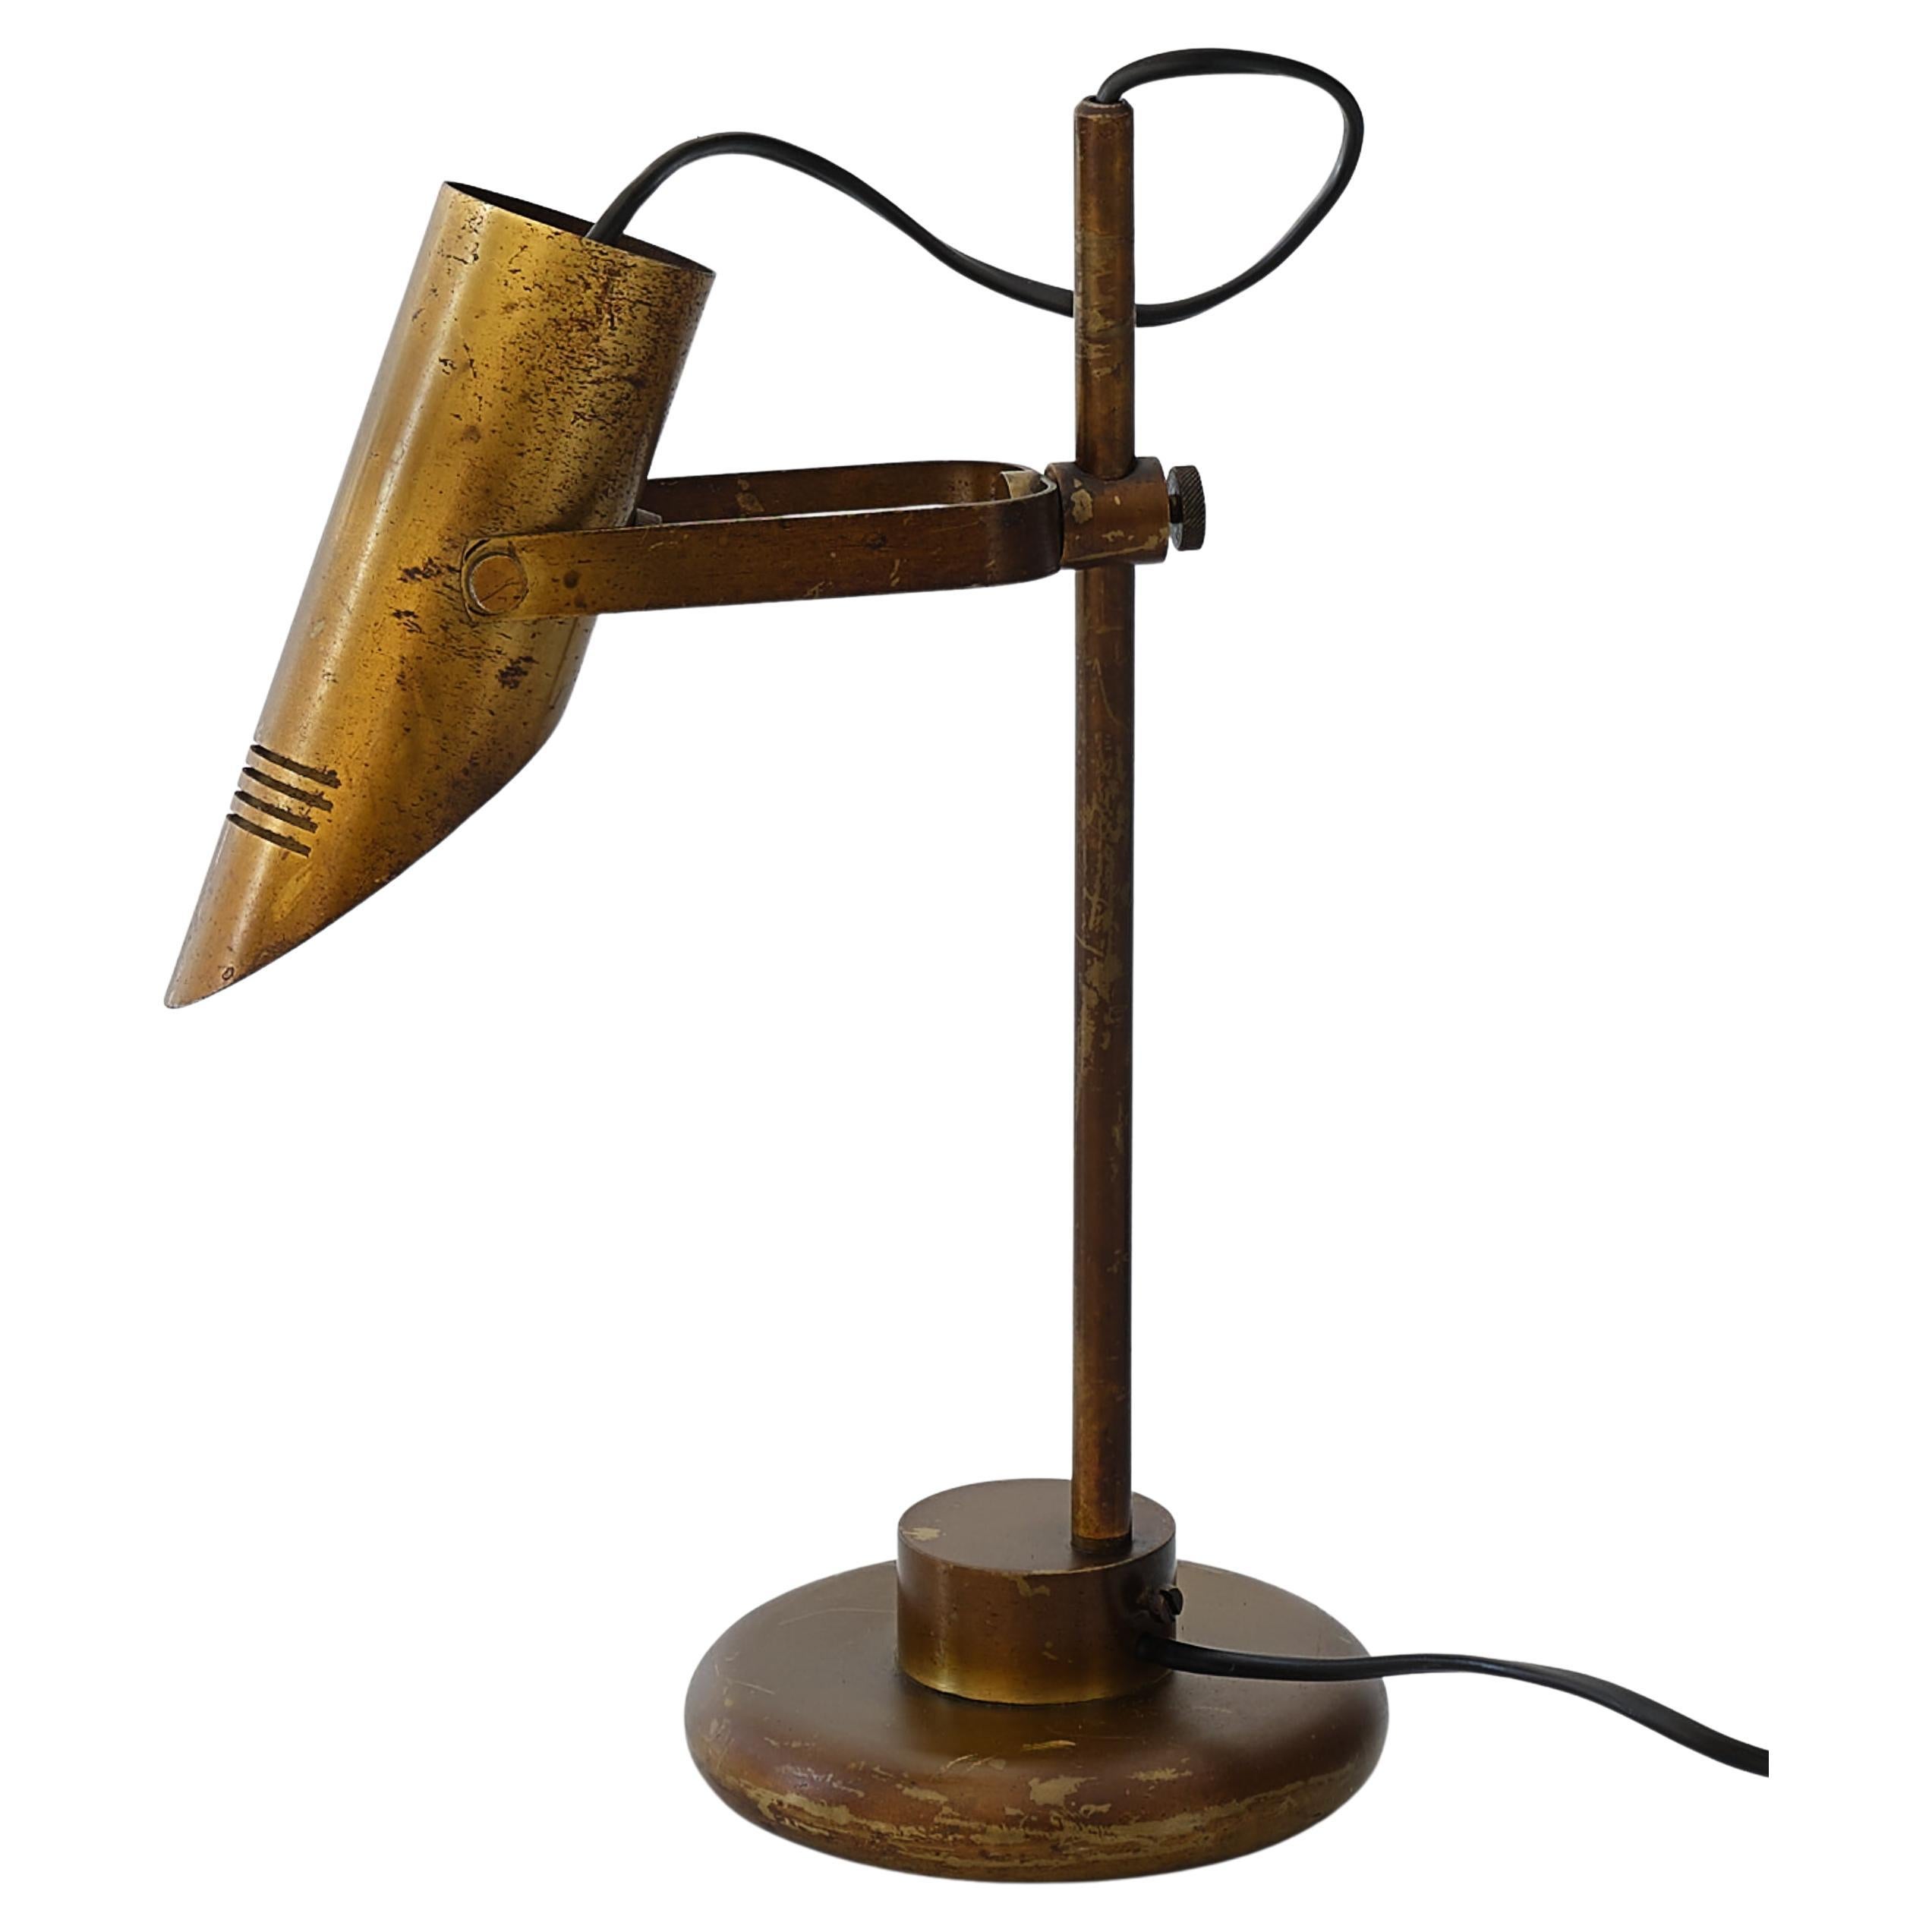 Table or desk lamp, Italian production, 1950s / 60s.

Entirely made of brass, with a beautiful patina that certainly makes it more beautiful than it was when new!
Standard E27 bulbs, we will provide USA plug adapter.